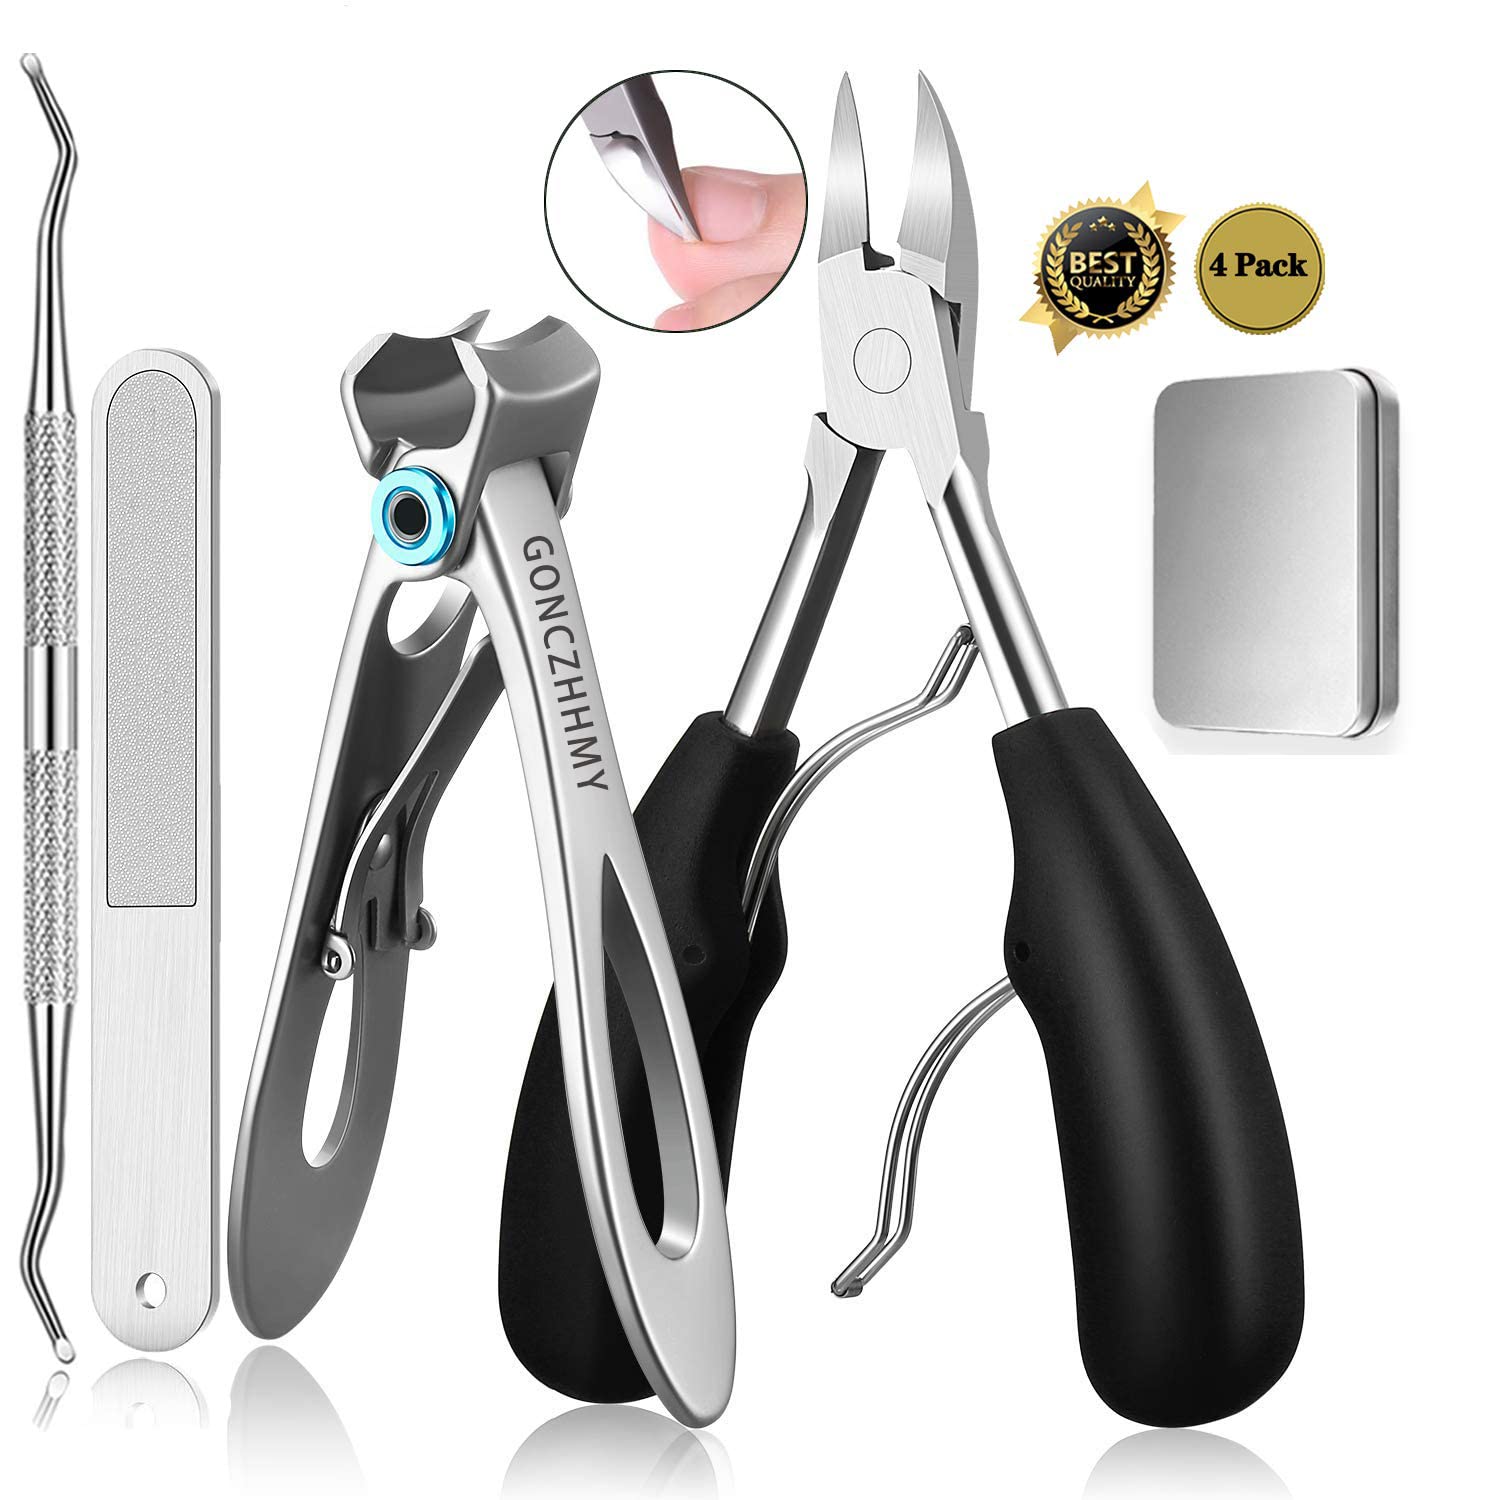 Toe Nail Clippers for Thick Nails Large Toenail Clippers for